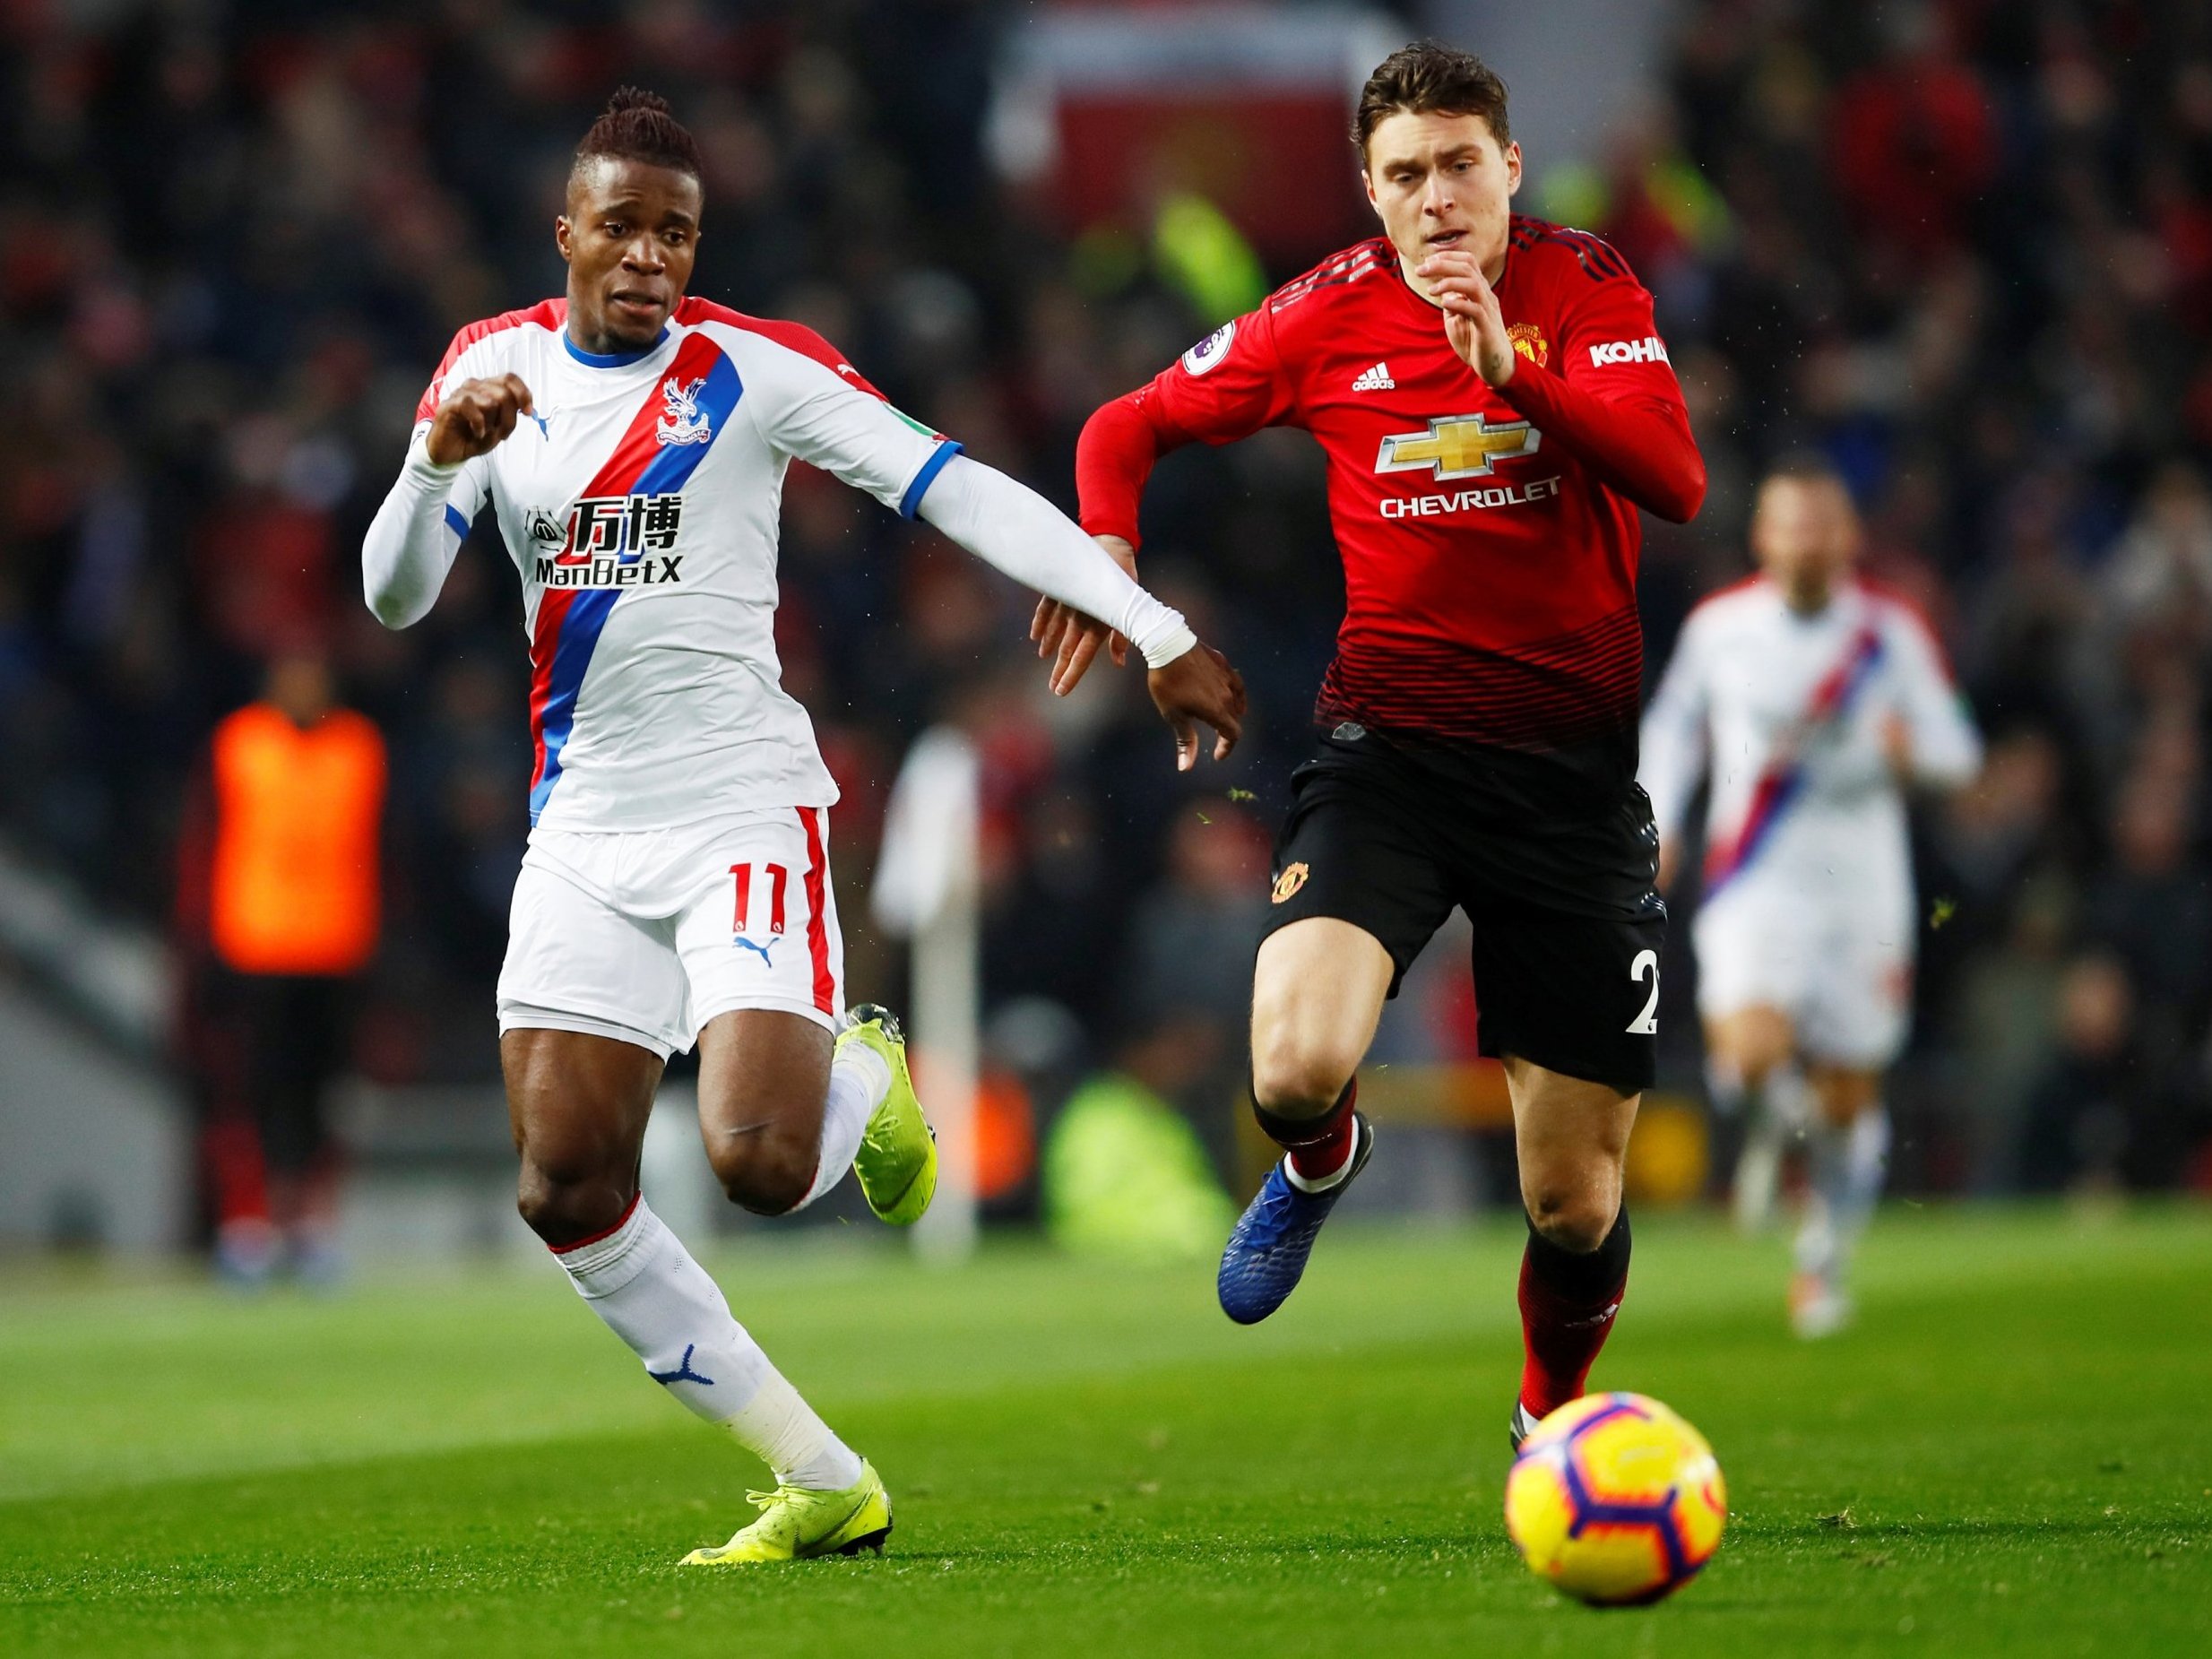 Manchester-United vs Crystal-Palace